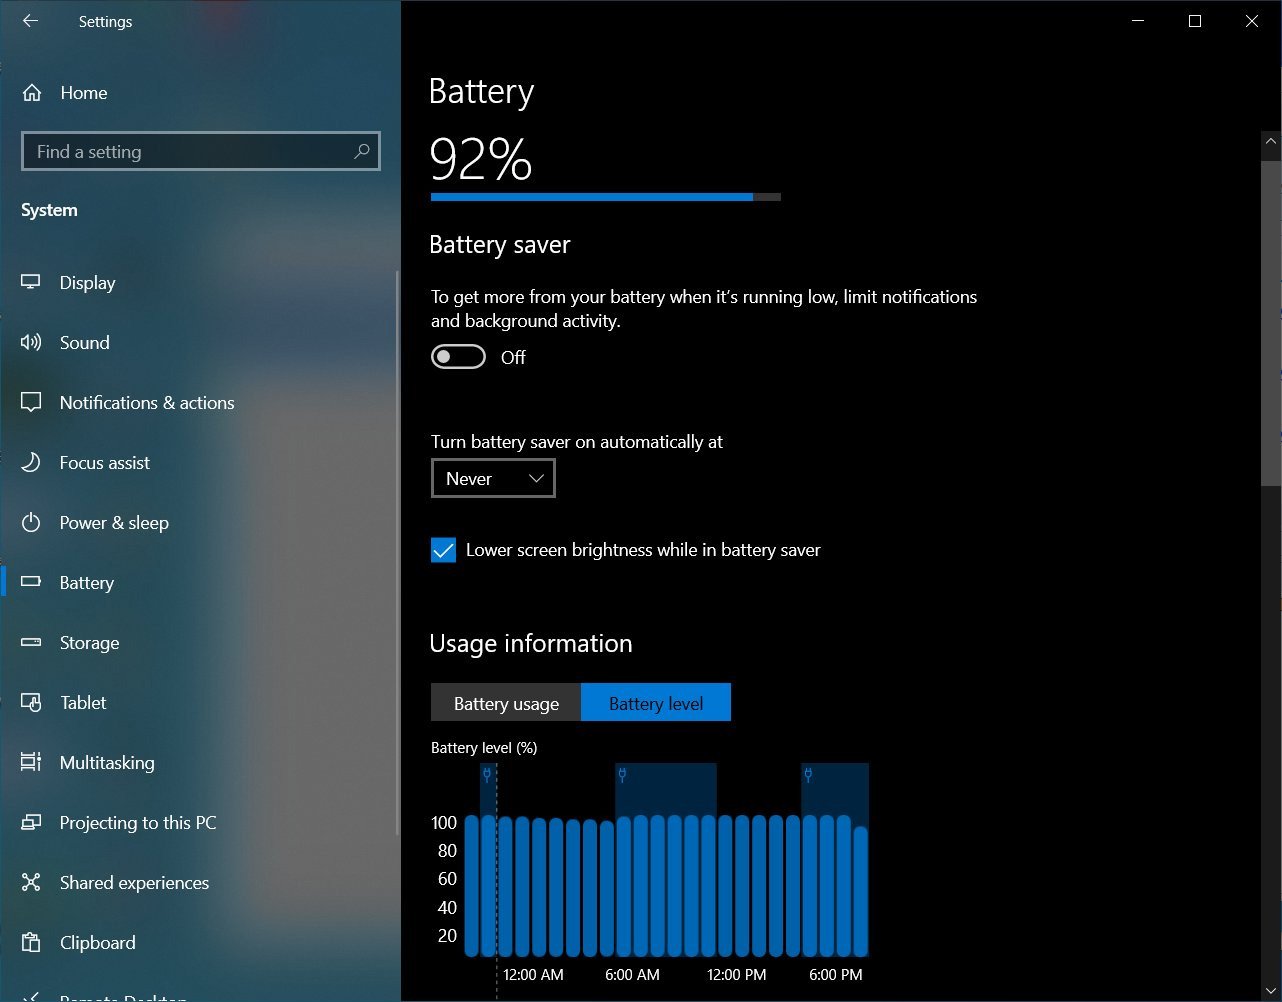 New and improved Battery settings page